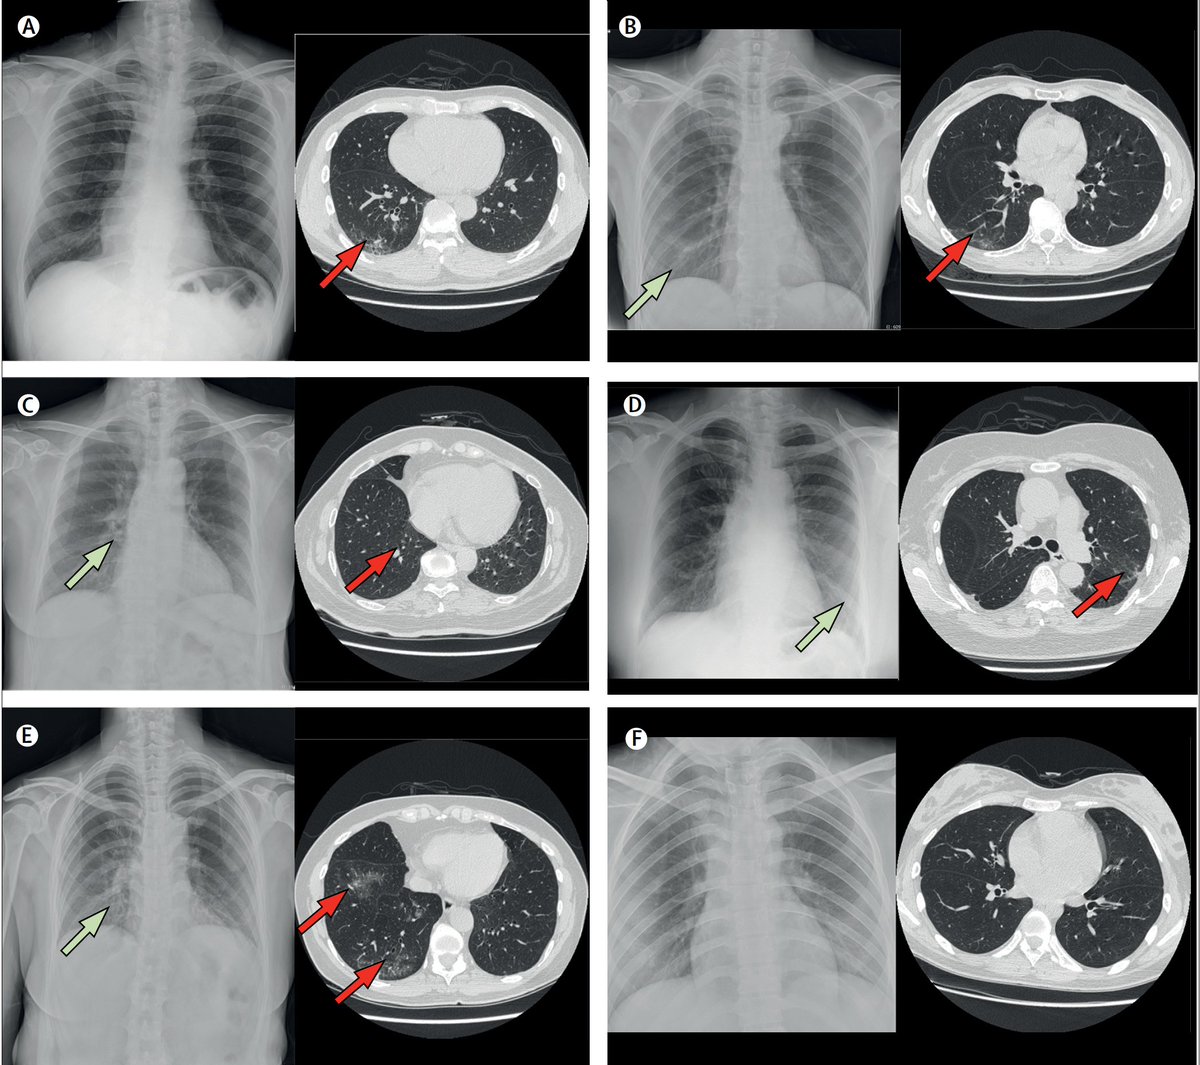 4. There are now 3 series of lung CT scans in people who were asymptomatic....